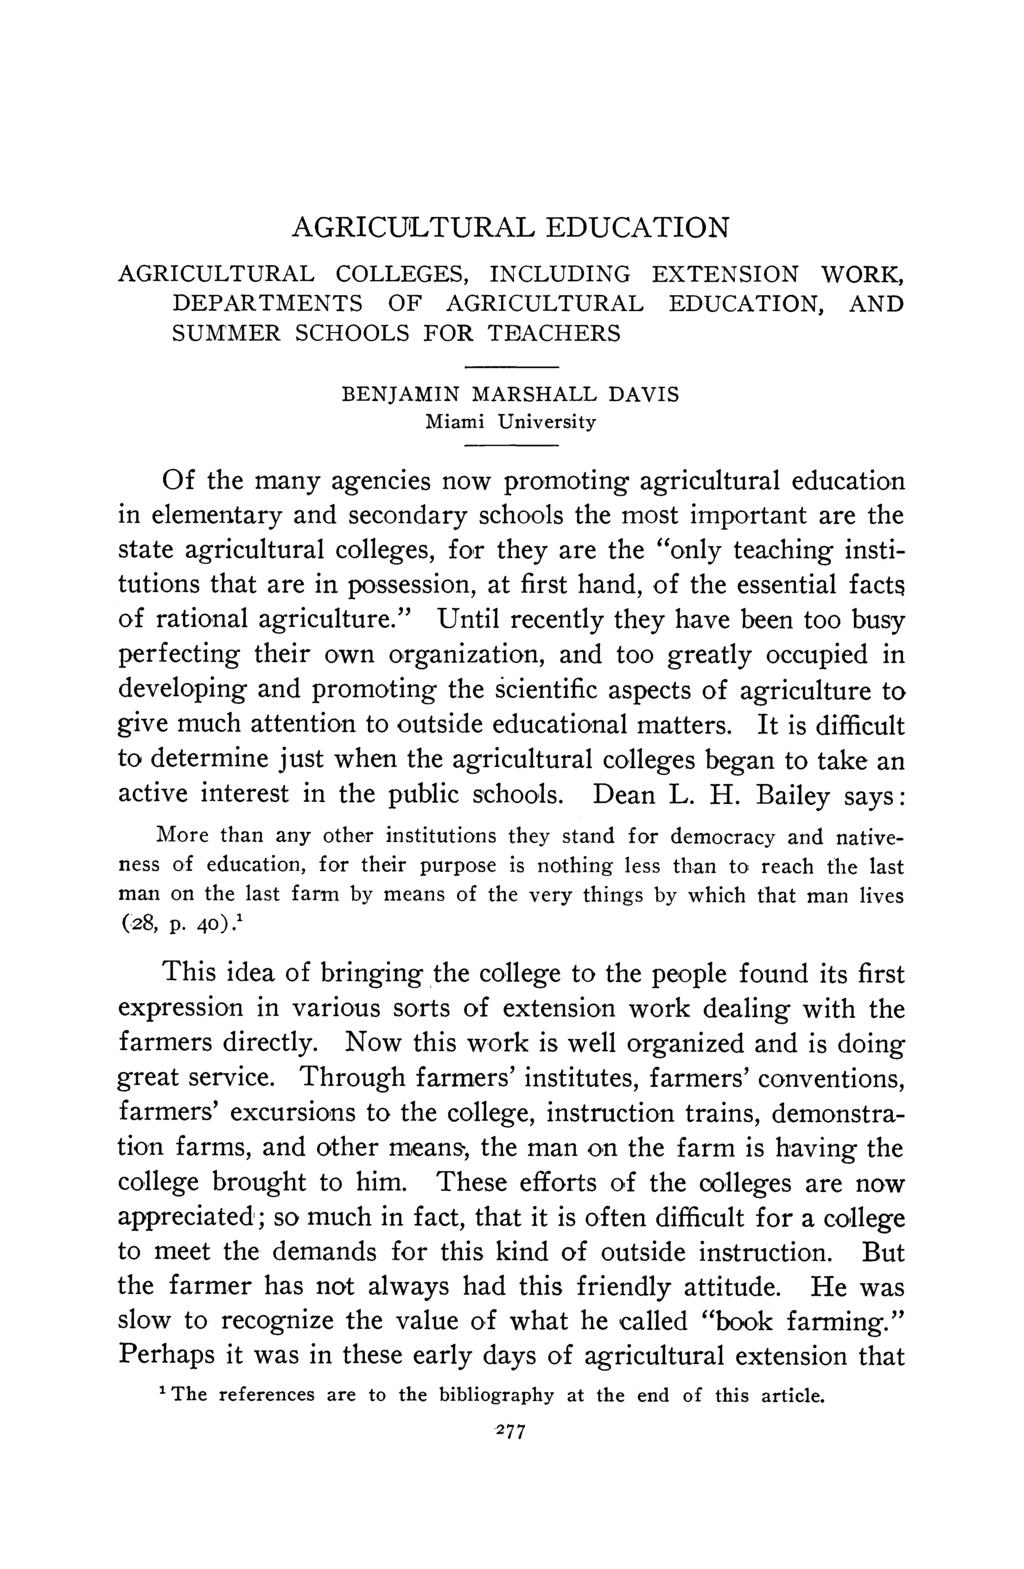 AGRICU'LTURAL EDUCATION AGRICULTURAL COLLEGES, INCLUDING EXTENSION WORK, DEPARTMENTS OF AGRICULTURAL EDUCATION, AND SUMMER SCHOOLS FOR TEACHERS BENJAMIN MARSHALL DAVIS Miami University Of the many